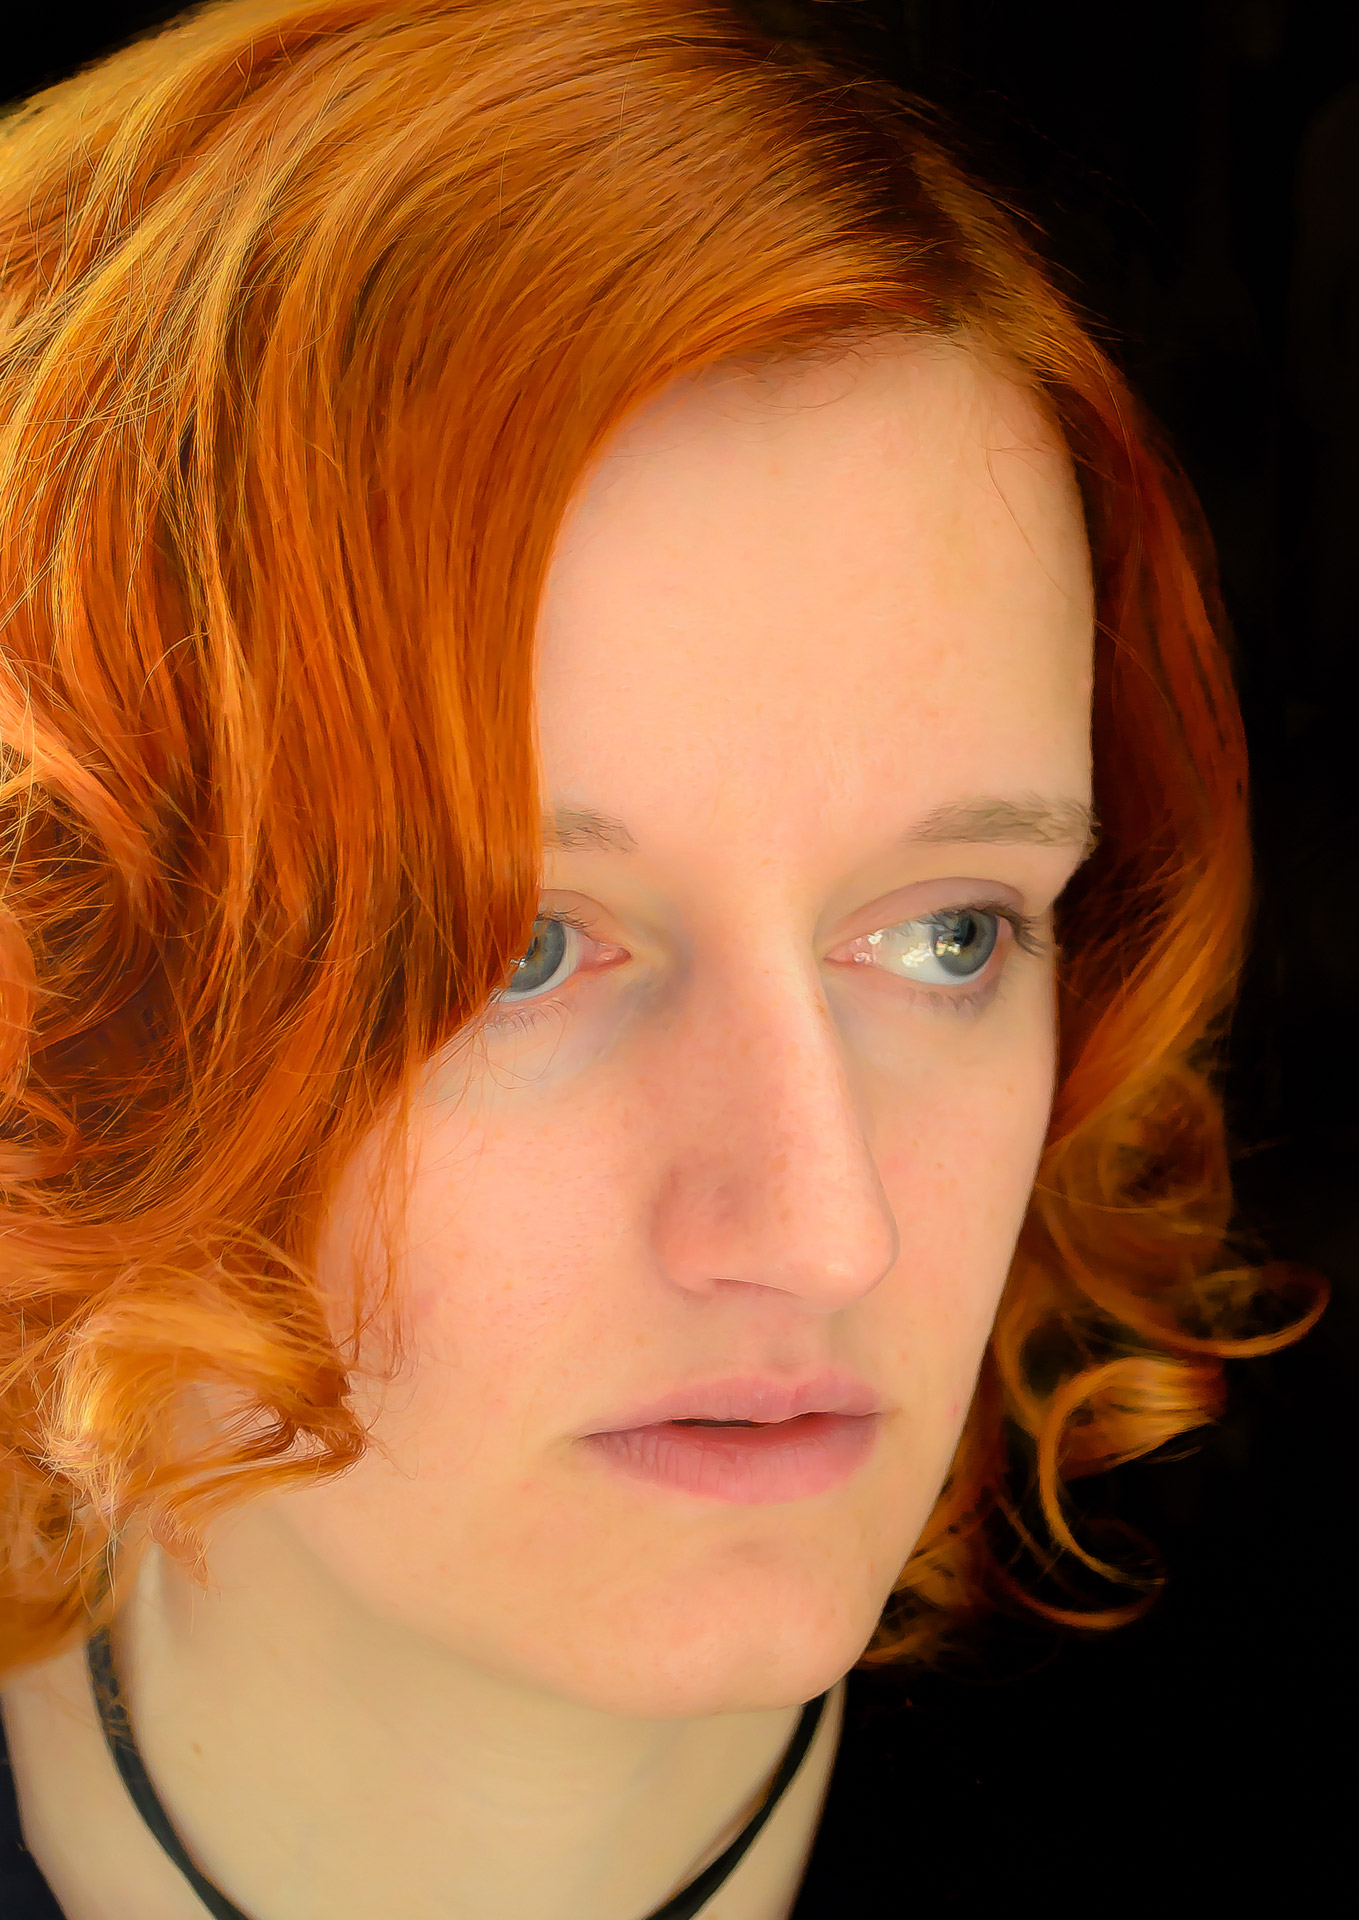 FileWoman With Red Hair.jpg Wikimedia Commons